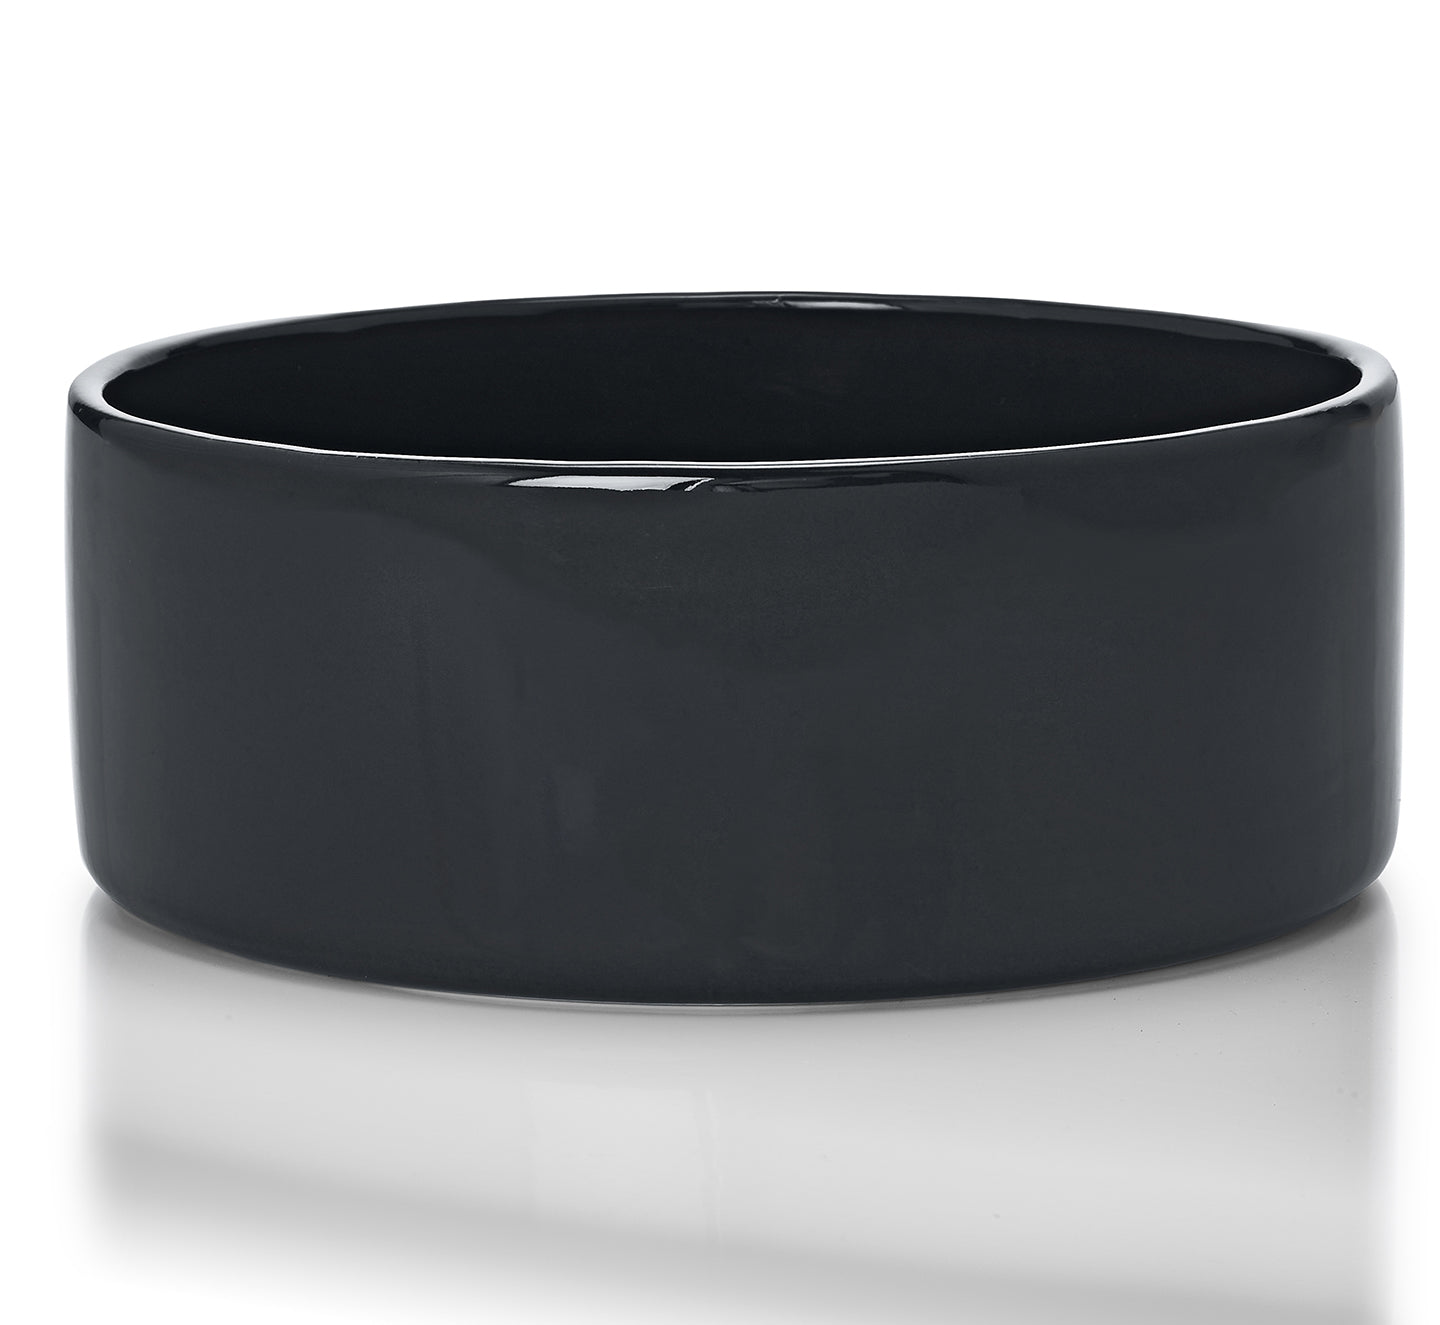 Scodella Porcelain Dog Bowl - easy to clean and hygienic